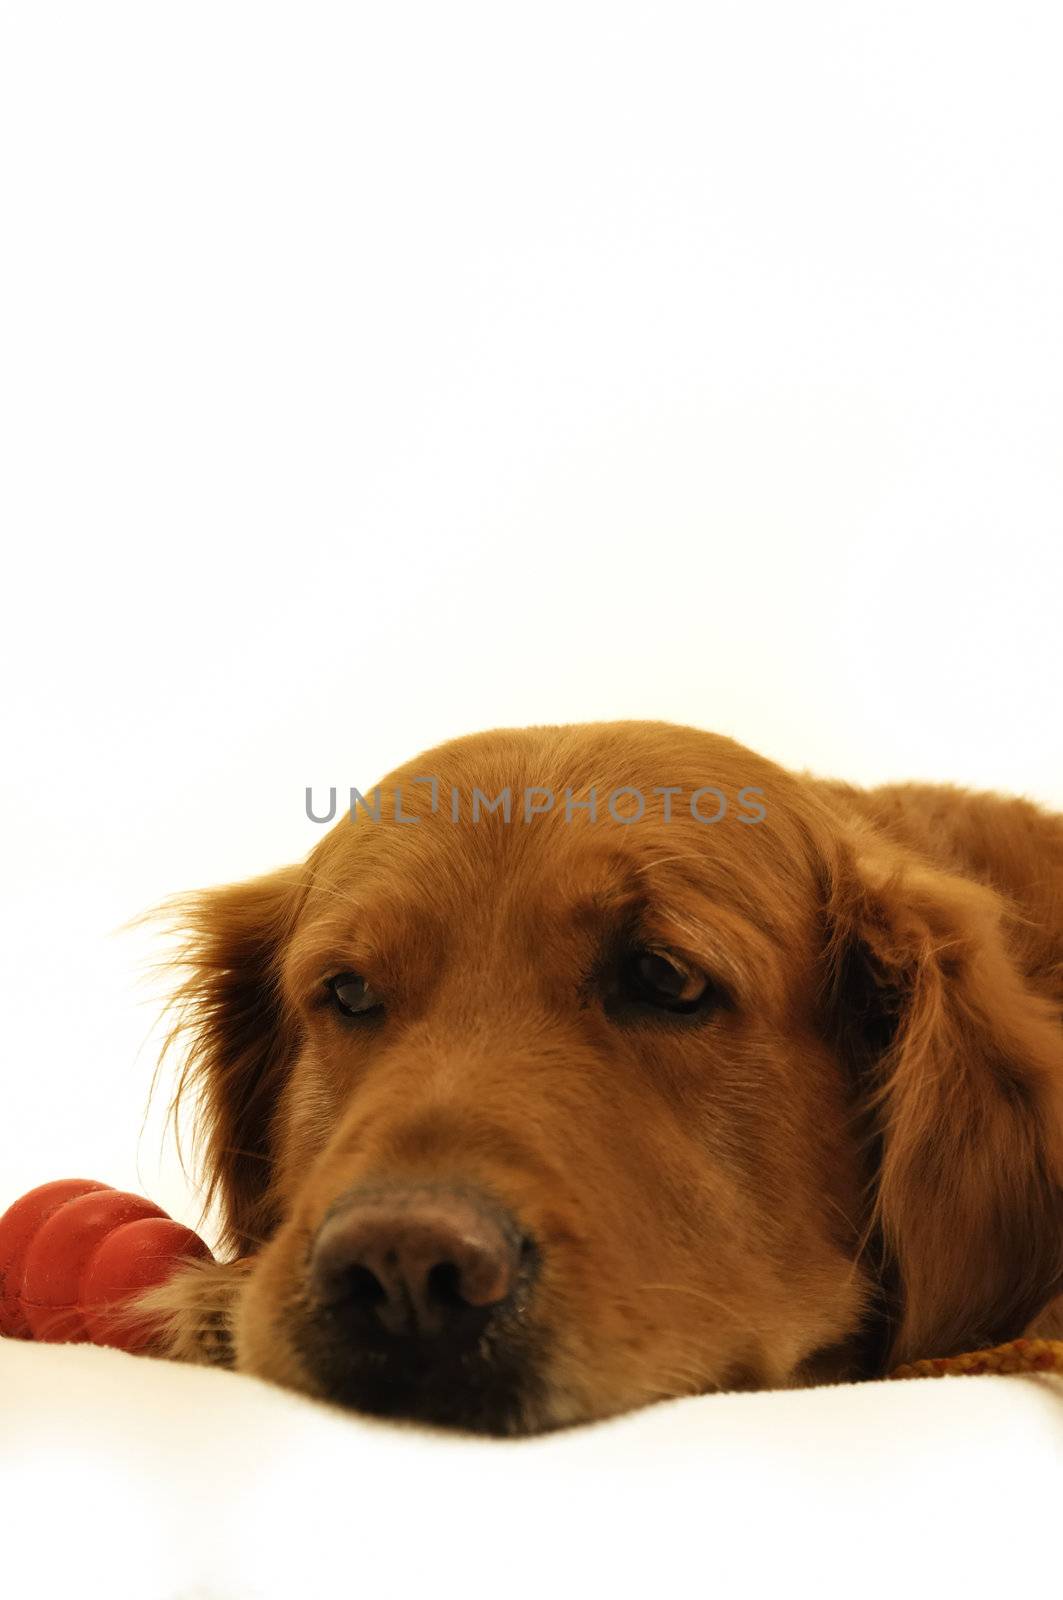 Golden Retriever lying with toy. by jmffotos